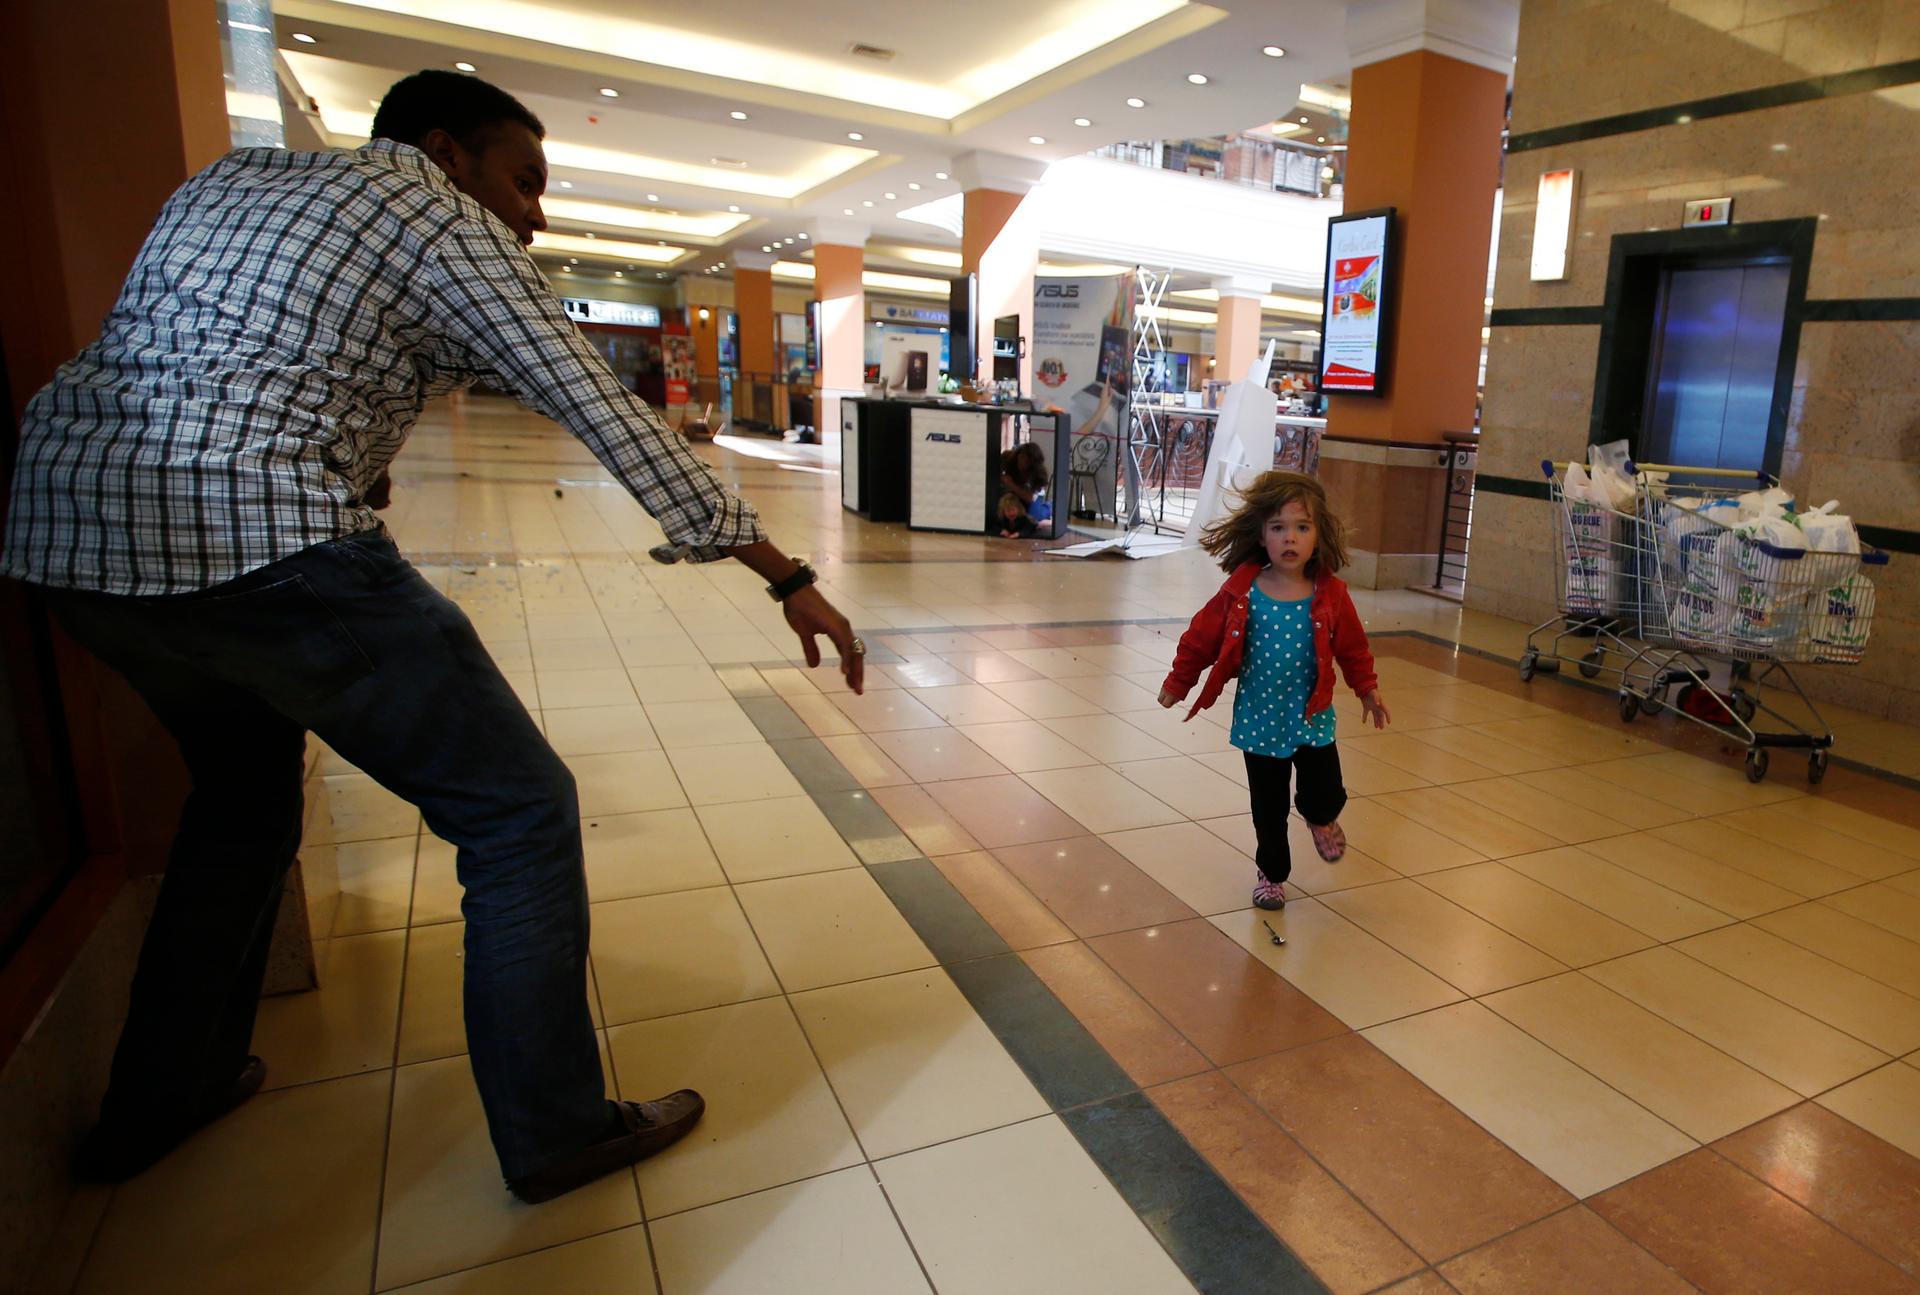 Four year old Portia Walton runs toward Abdul Haji during the Westgate Mall massacre. Her mom and others shelter under the black and white table in the middle. The terrorists are holed up and firing from the supermarket beyond the table.